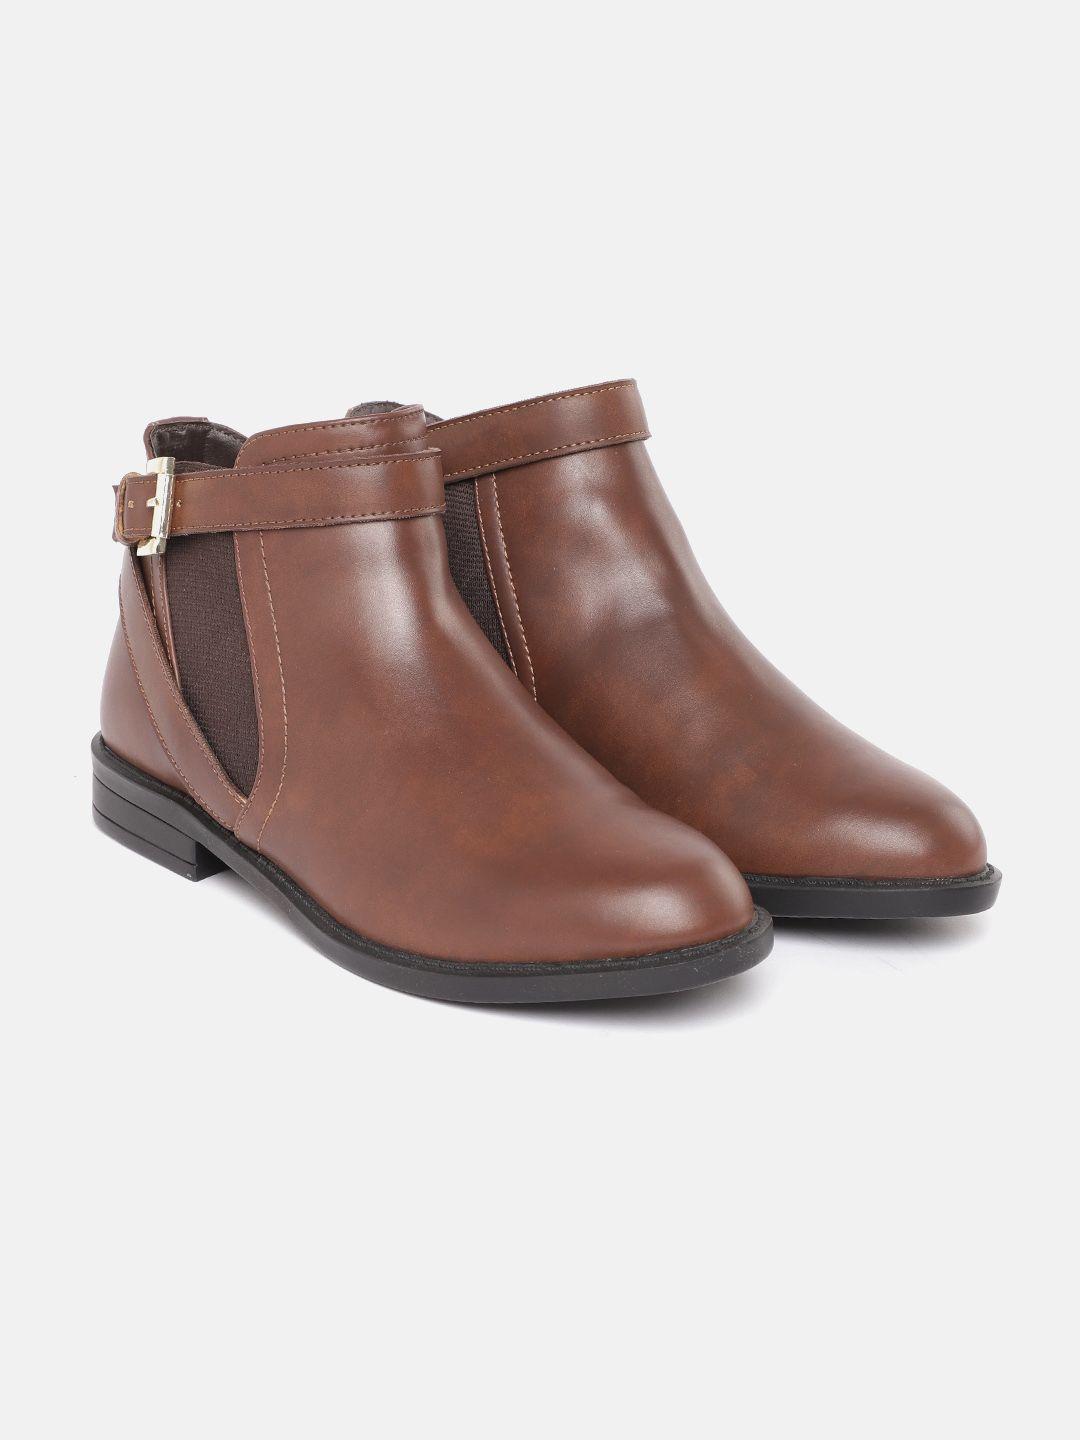 carlton-london-women-brown-solid-mid-top-chelsea-boots